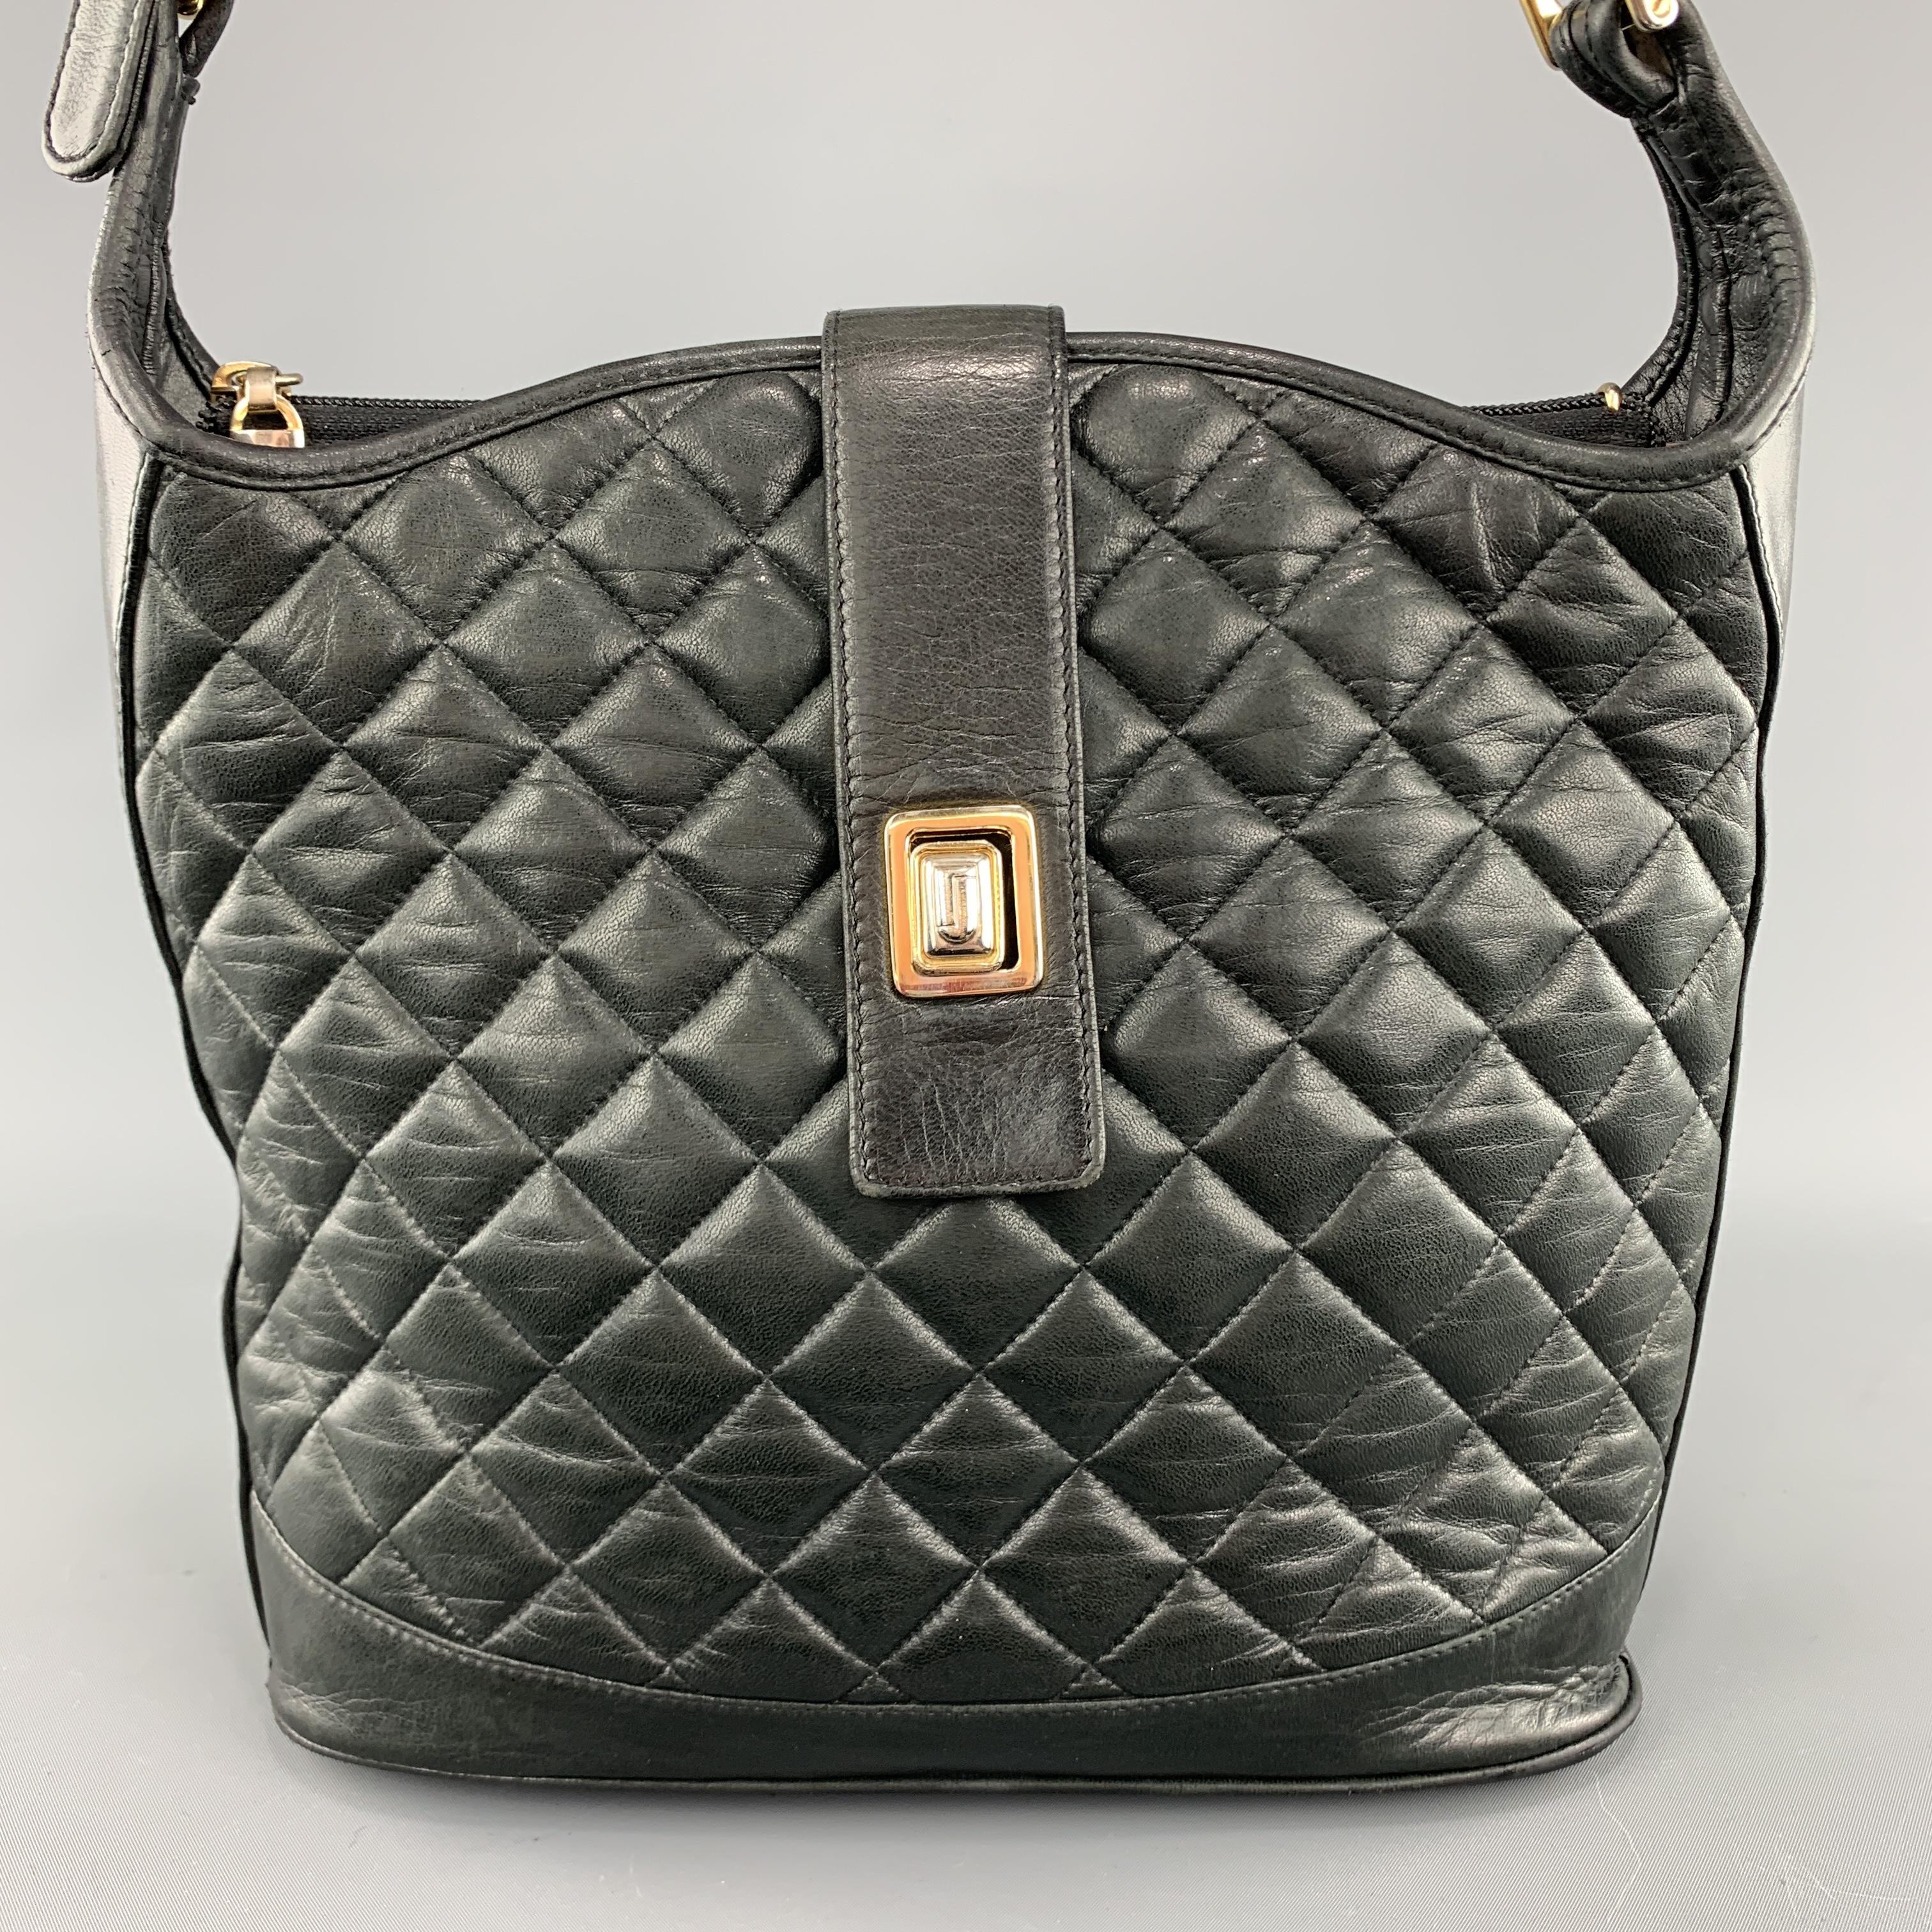 Vintage JUDITH LEIBER shoulder bag comes in quilted leather with gold and silver tone hardware, top strap closure, adjustable shoulder strap, and double compartment red interior. Aging and wear throughout. As-is. Made in Spain.

Good Pre-Owned